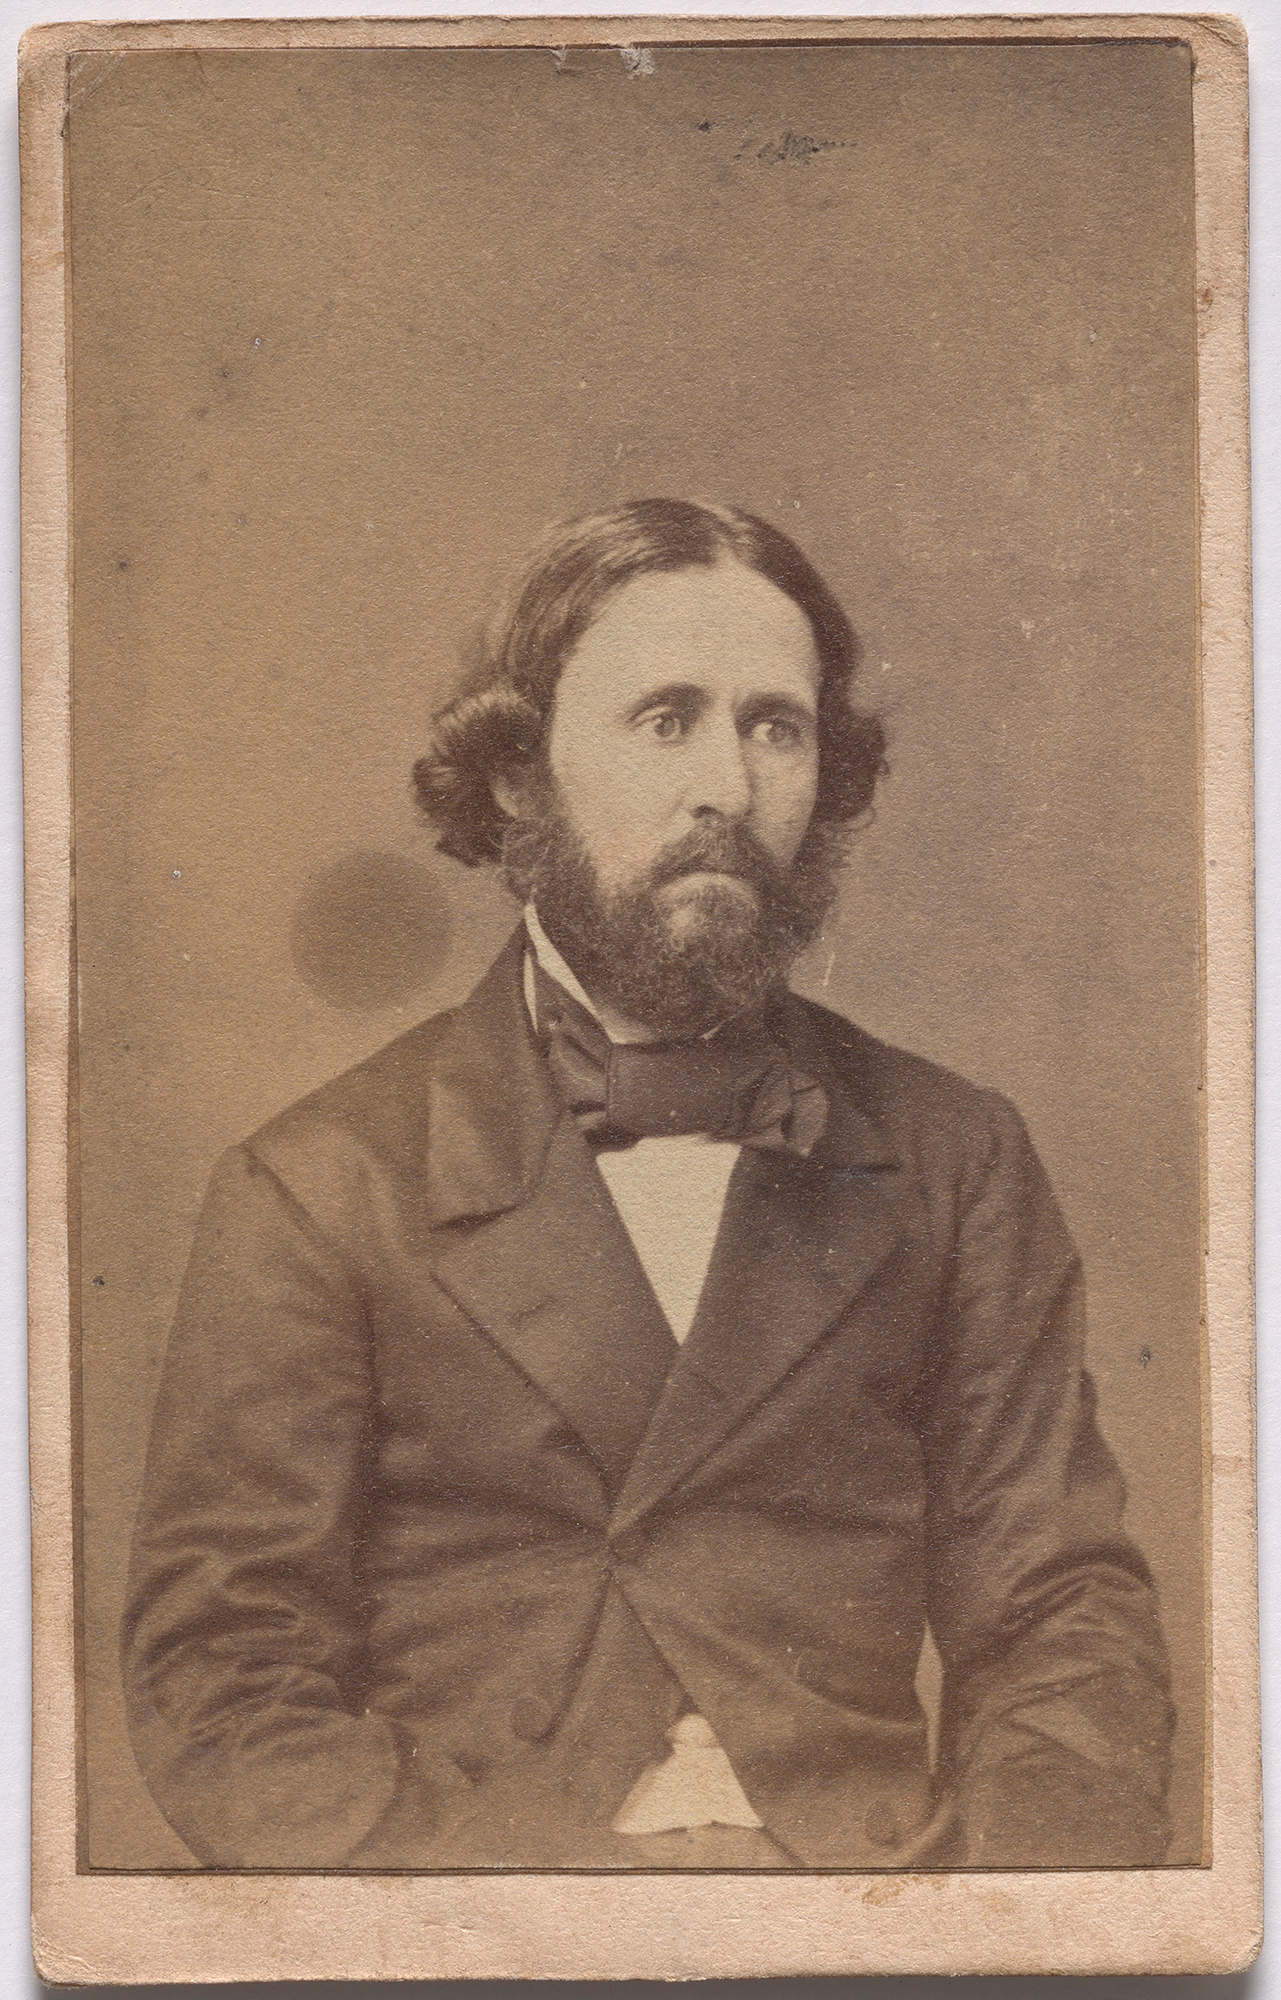 Meade Brothers Studio, John Charles Frémont, c. 1856, photograph, 9.2 x 5.7 cm (National Portrait Gallery, Smithsonian Institution)